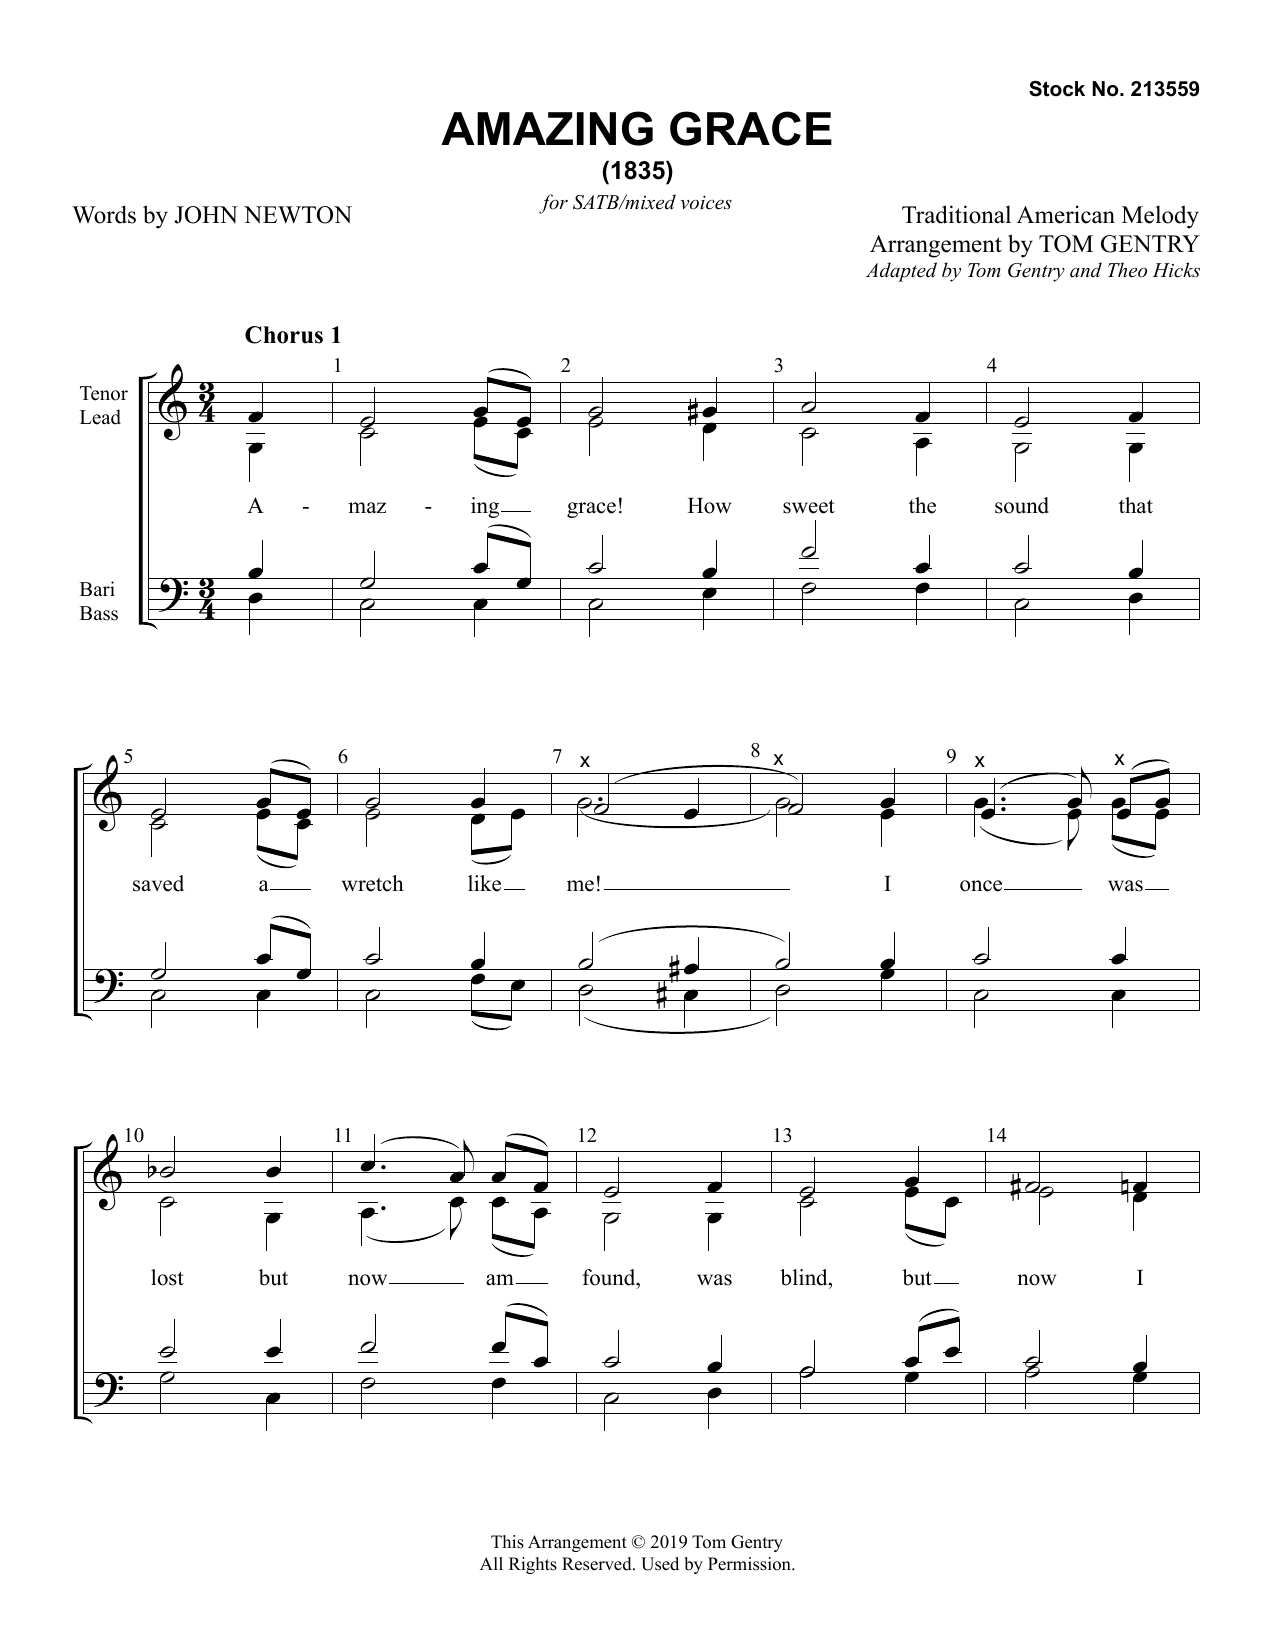 Download Traditional American Melody Amazing Grace (arr. Tom Gentry) Sheet Music